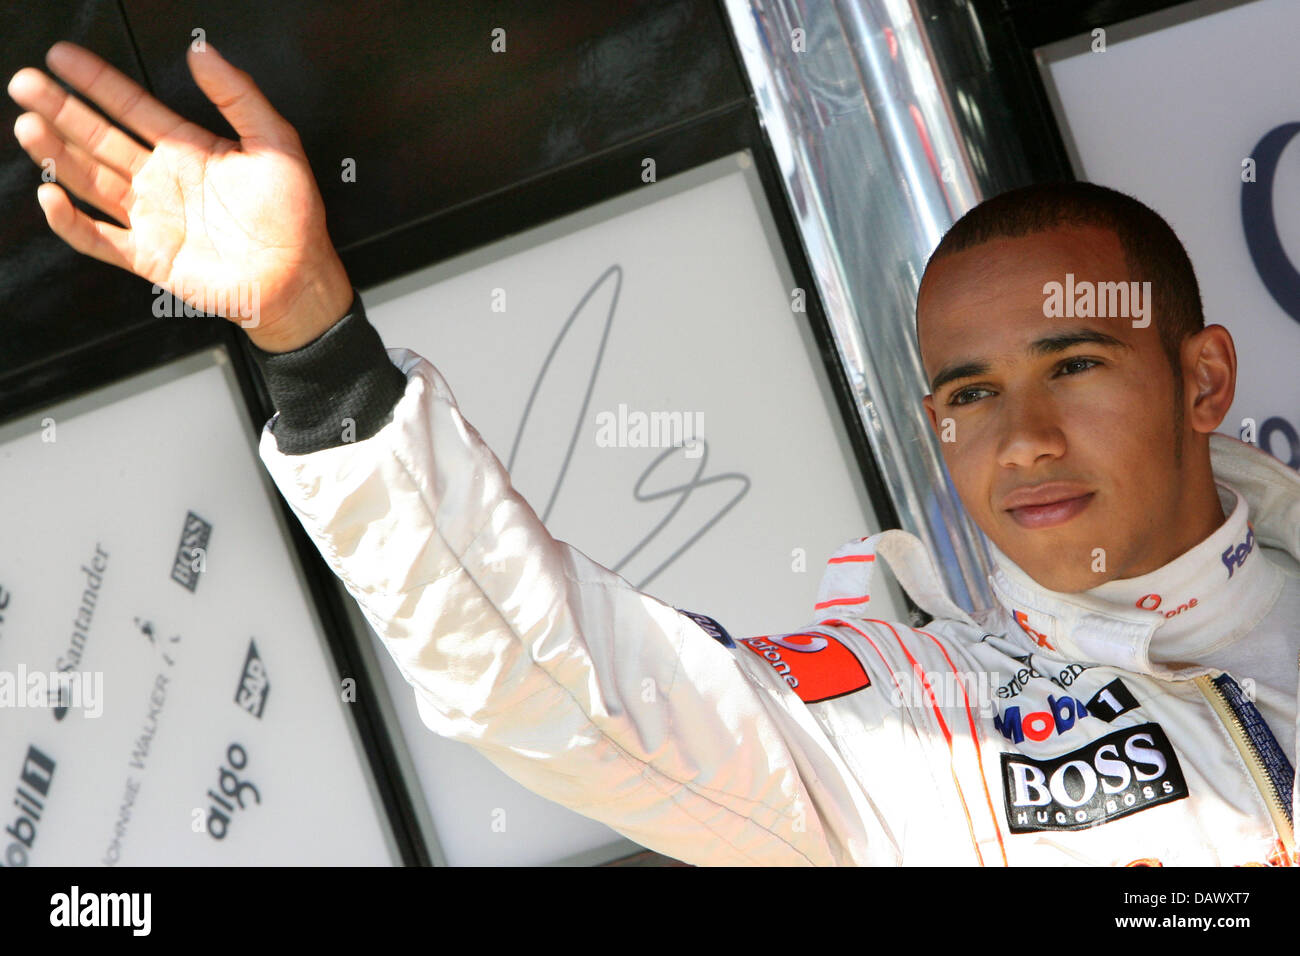 British Formula One pilot Lewis Hamilton of McLaren Mercedes waves after the third practice session at the Circuit de Catalunya race track near Barcelona, Spain, 12 May 2007. Hamilton drove the fastest lap. The 2007 Formula 1 Grand Prix of Spain takes place on 13 May. Photo: Jens Buettner Stock Photo